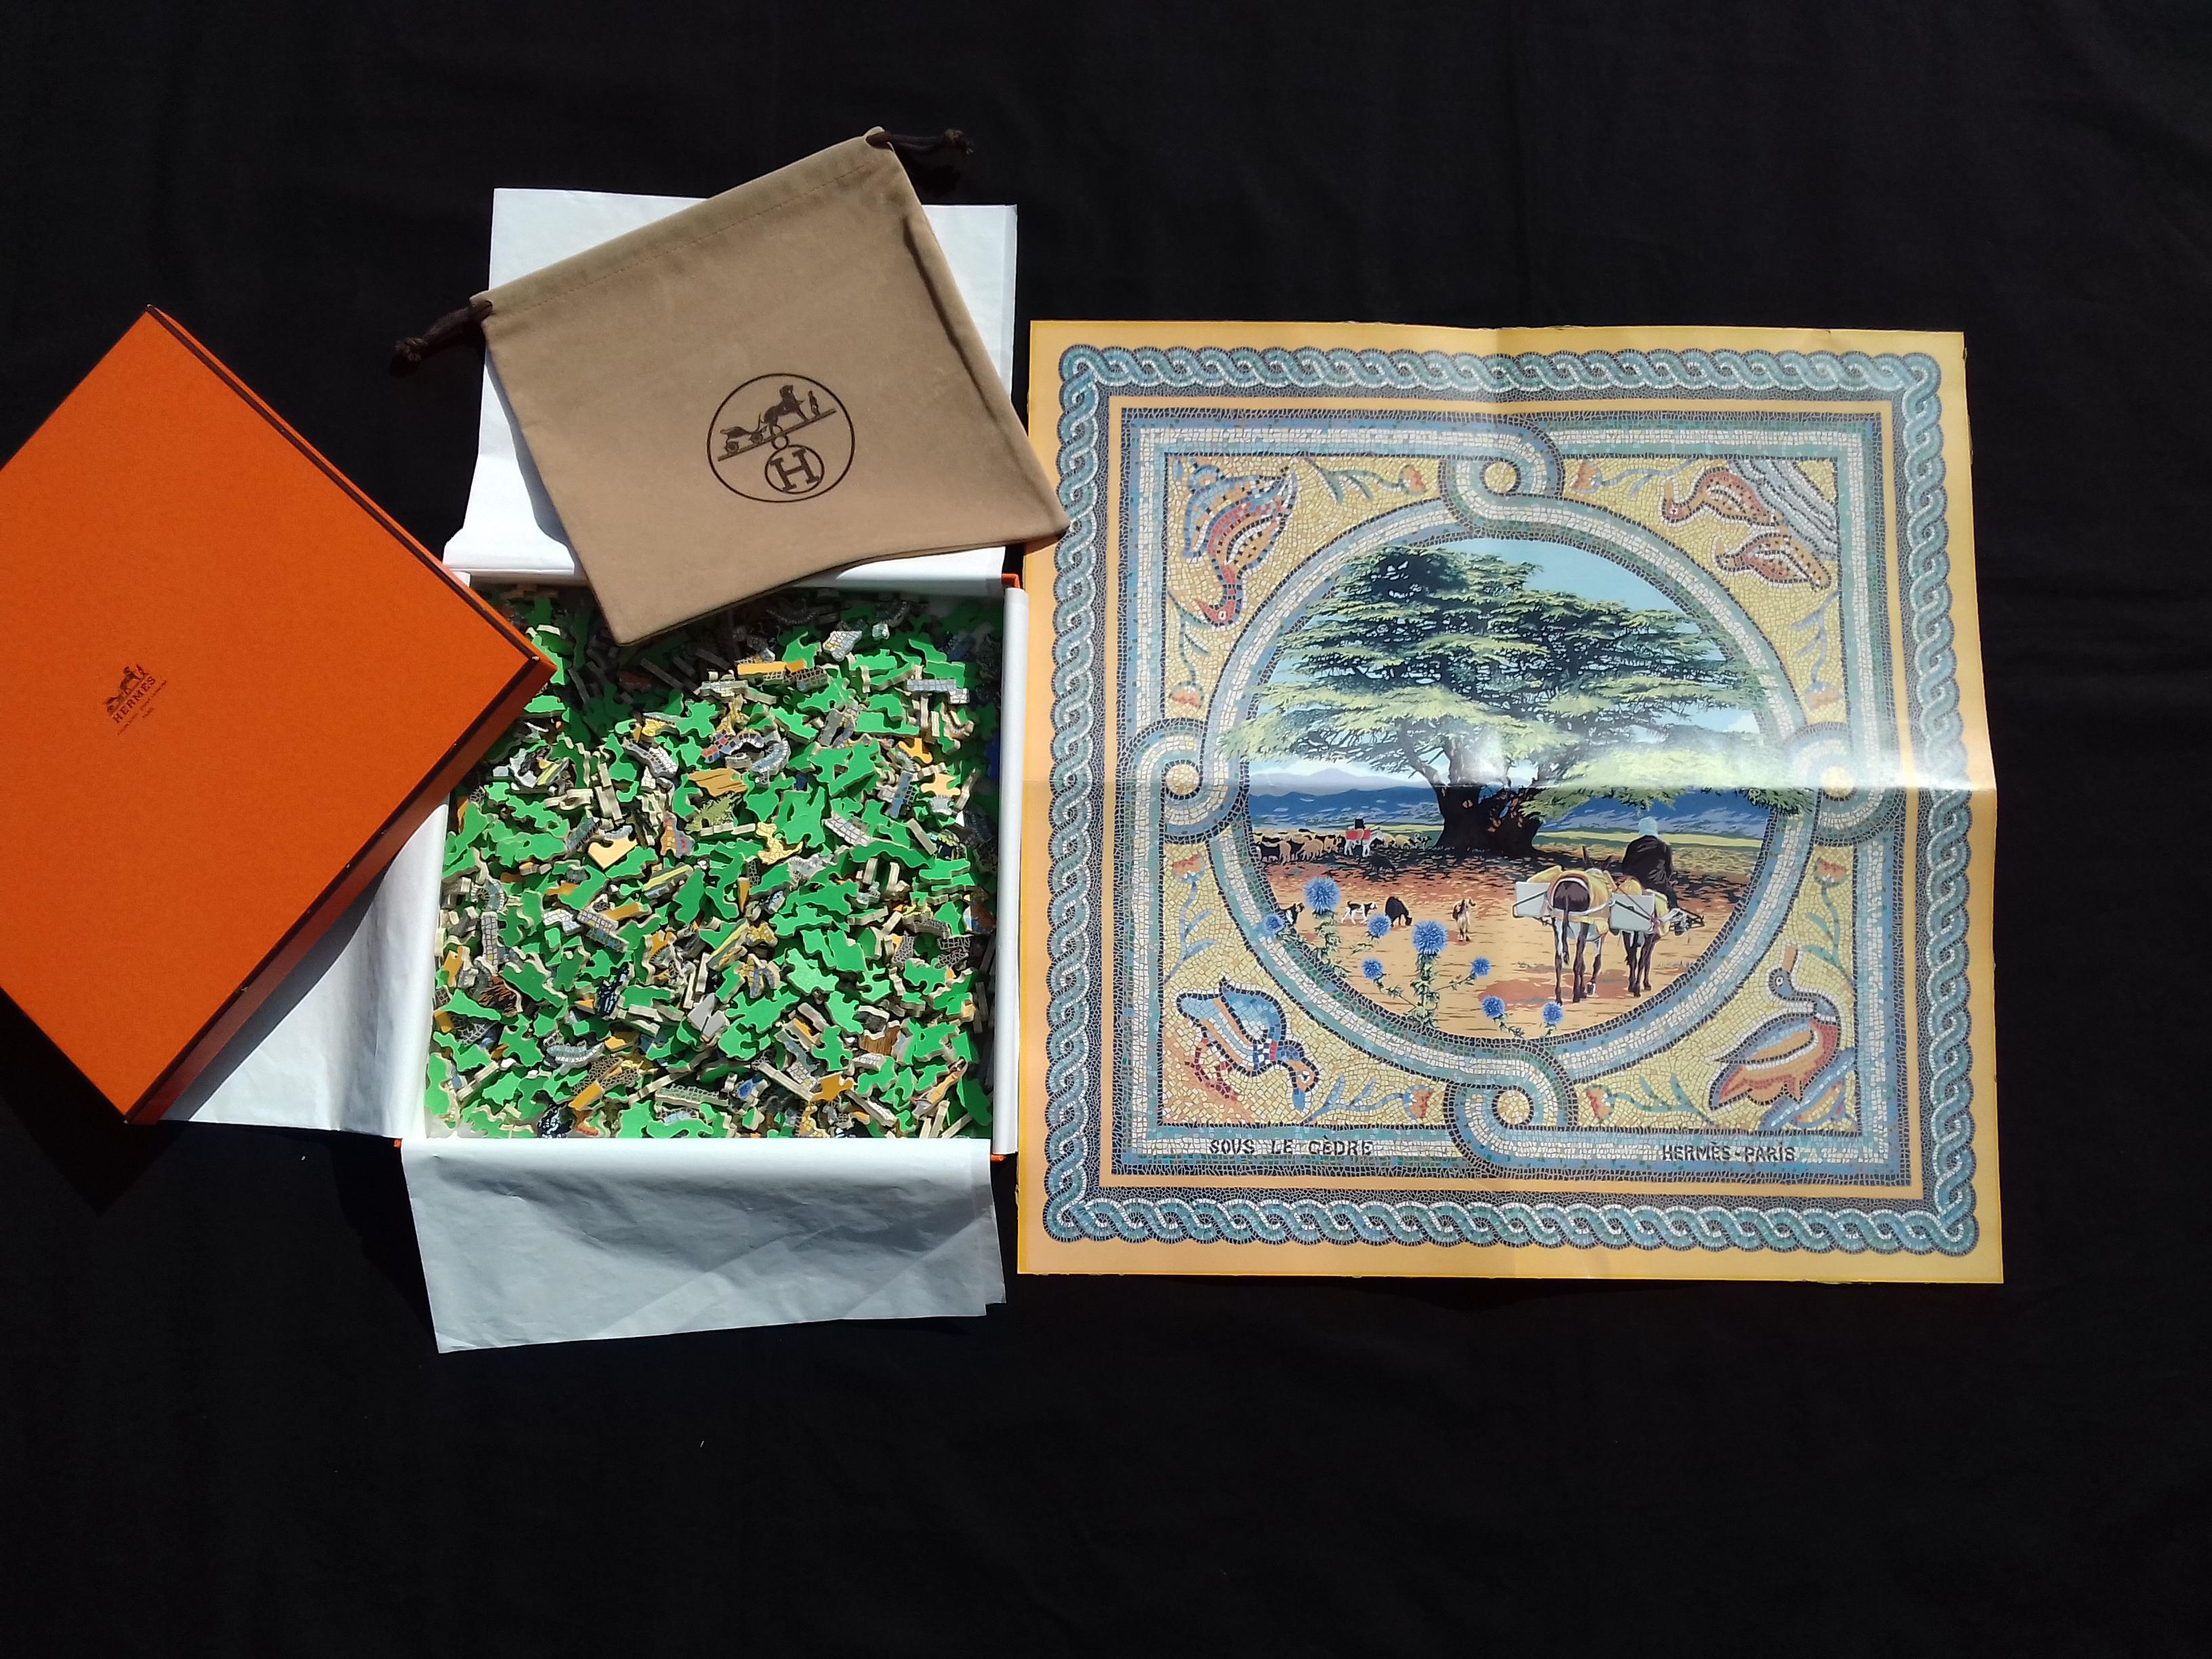 Rare and Beautiful Hermès Puzzle

Created for the Year of the Tree in 1998

Depicts the pattern 